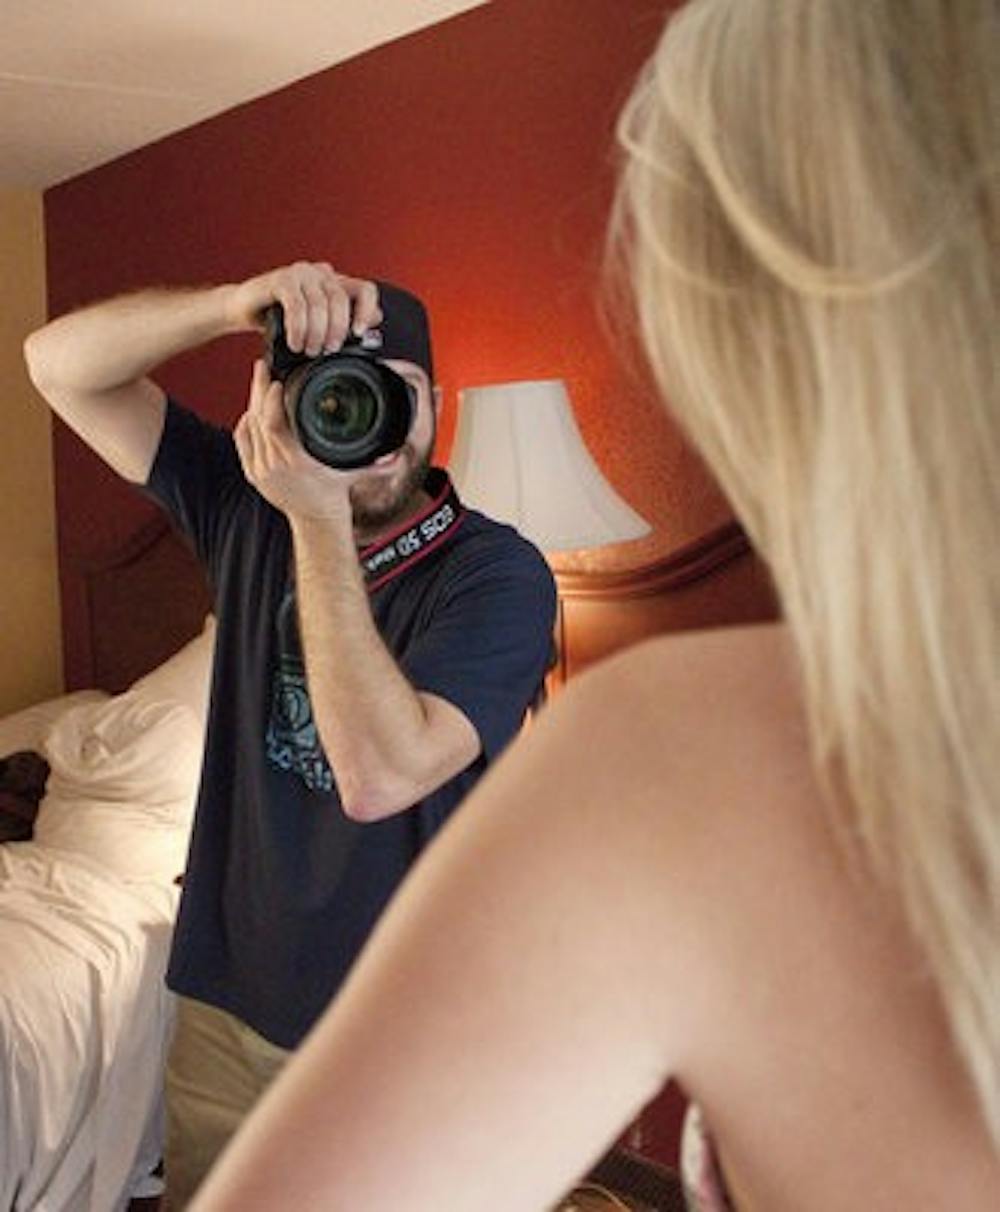 Zachary Johnson, Playboy photographer, shoots an eager coed for "Girls of the SEC." (Emily Adams / Photo Editor)